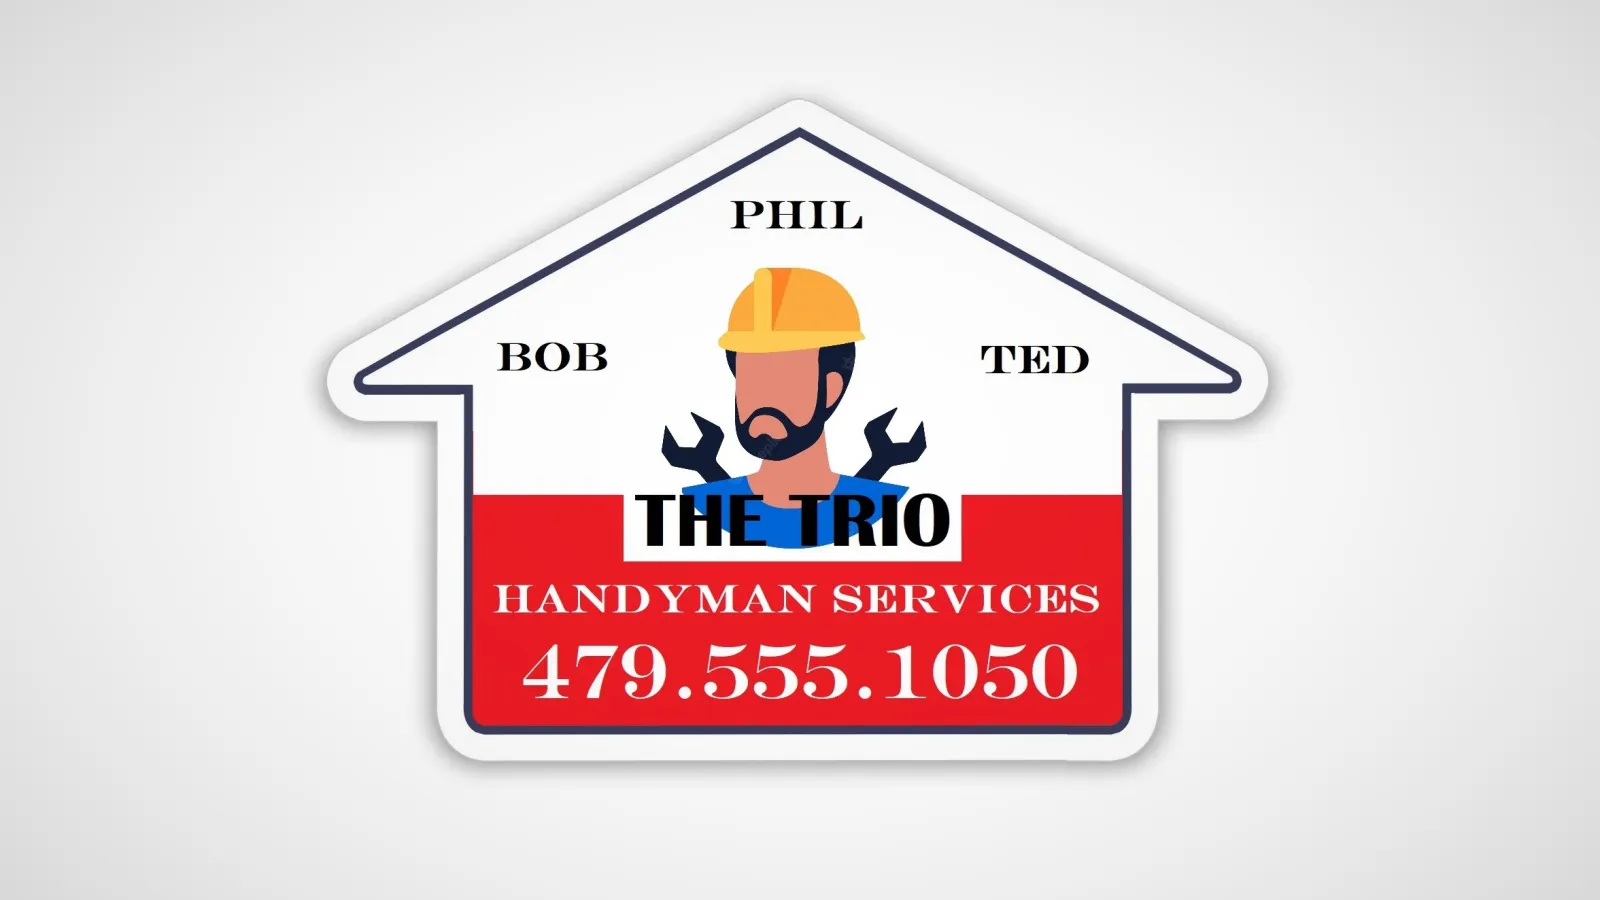 A house-shaped Magnet promoting a handyman service